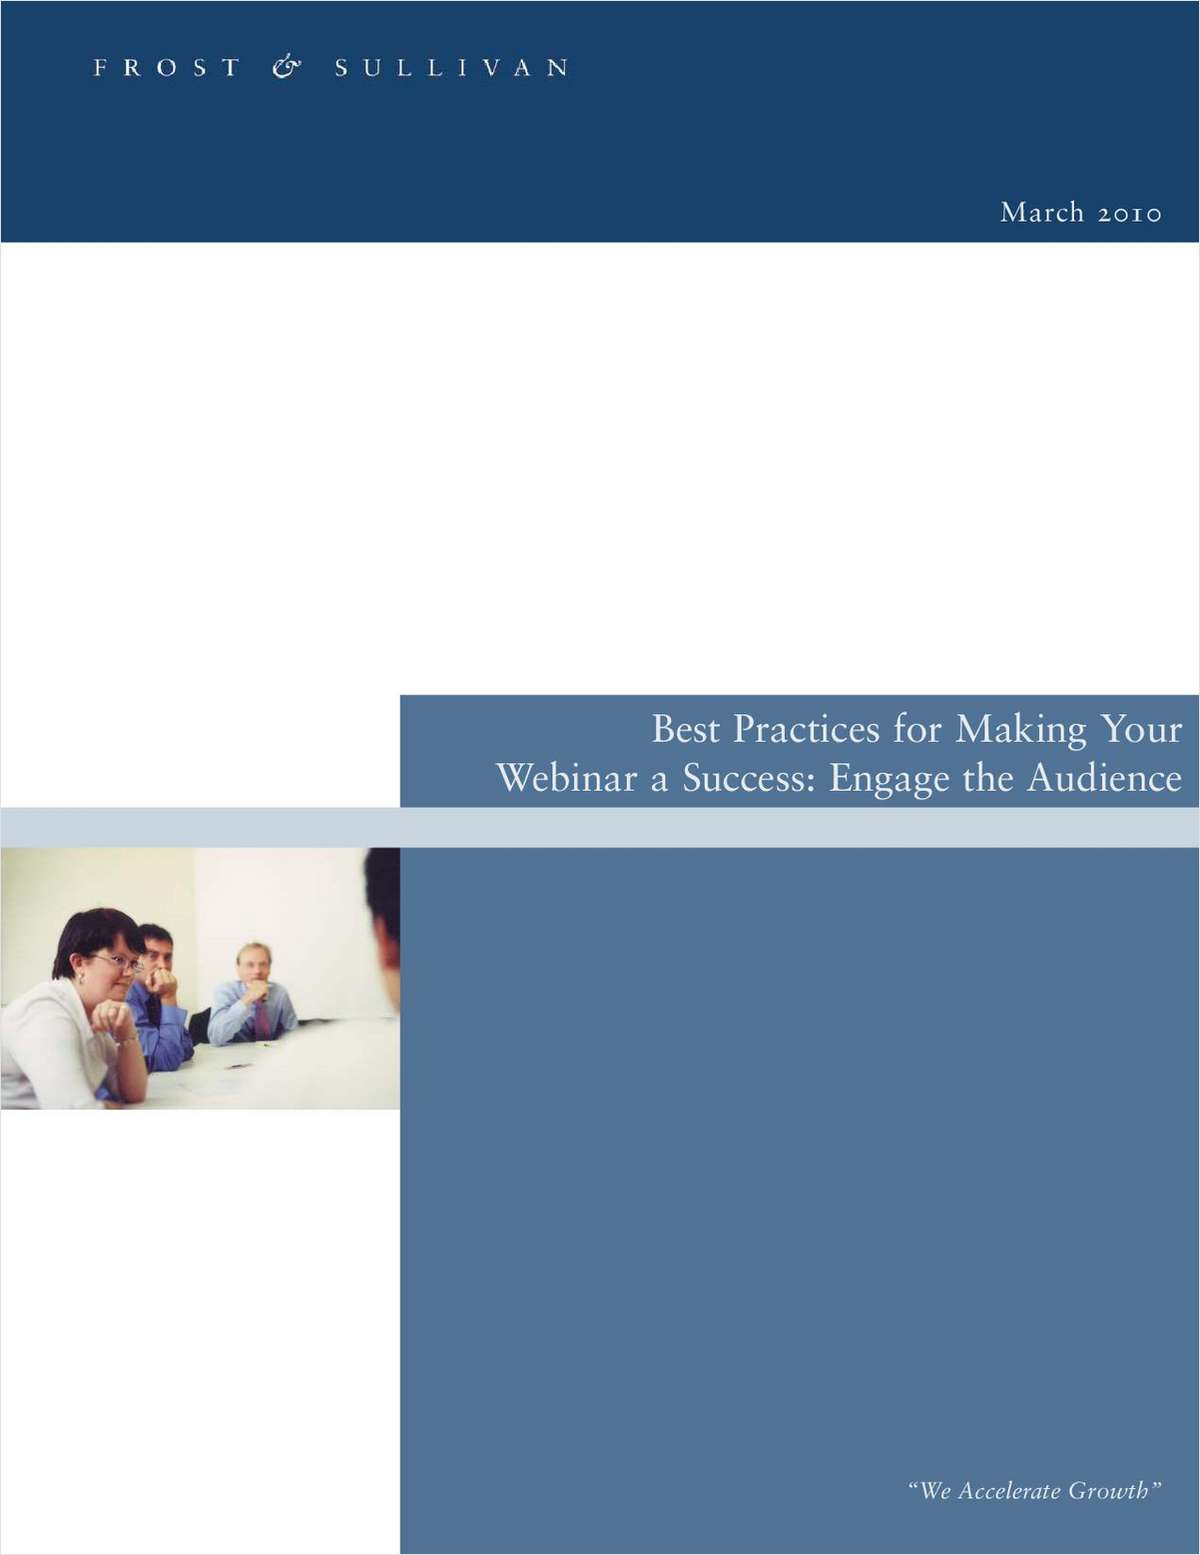 Best Practices for Making Your Webinar a Success - Engage the Audience